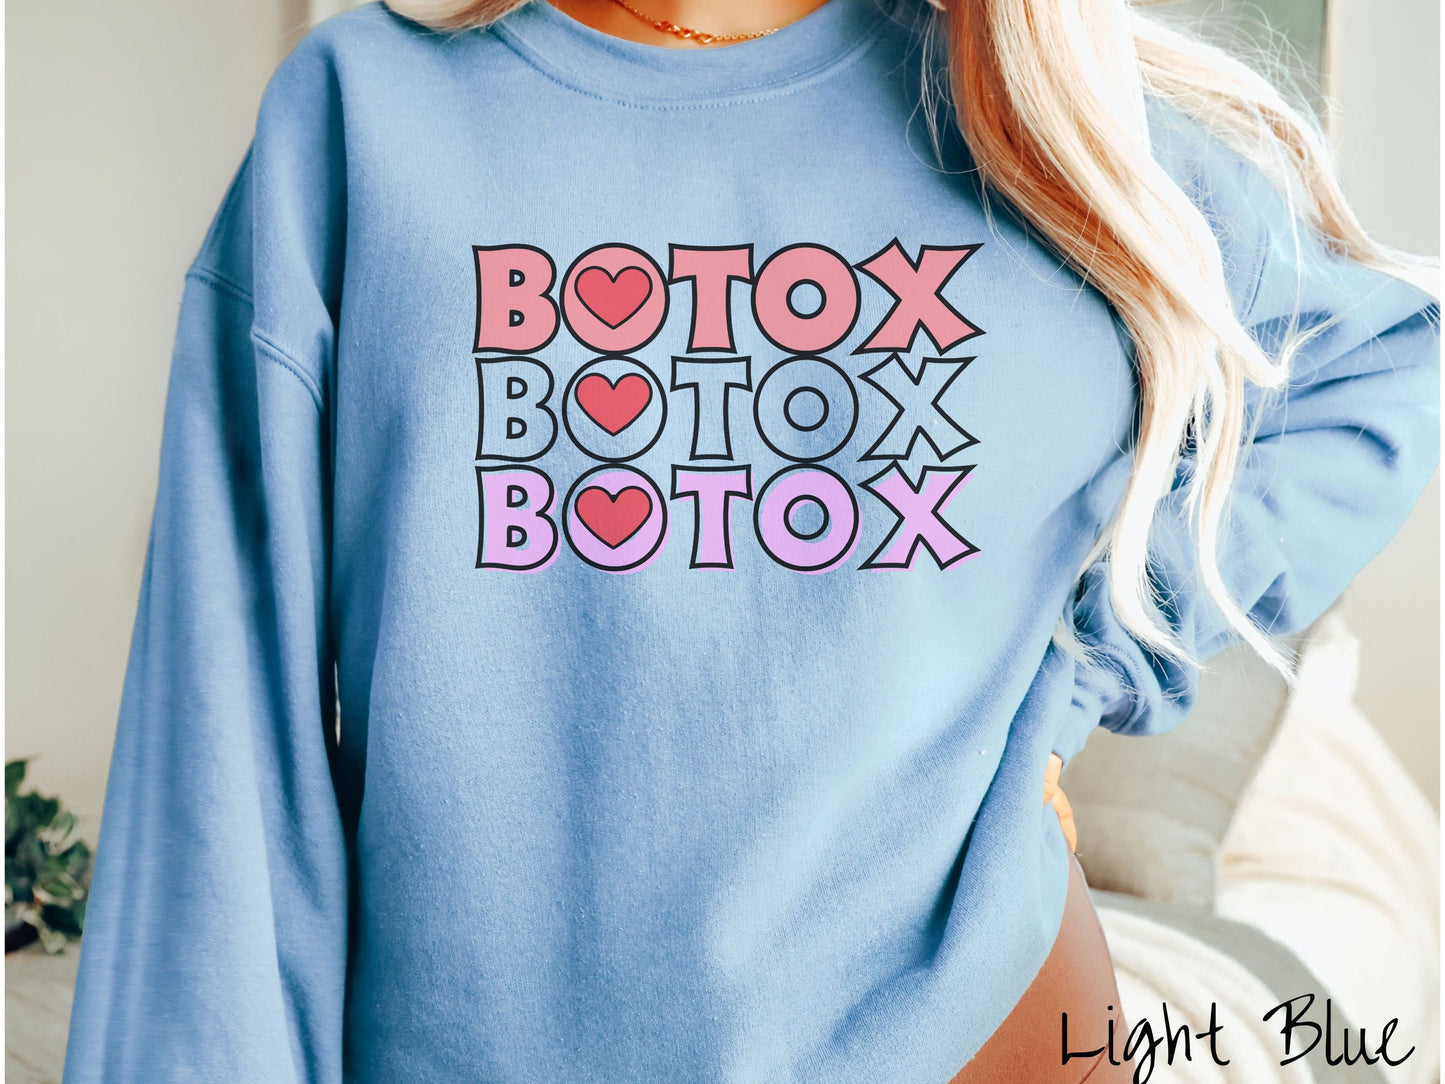 A woman wearing a cute light blue colored sweatshirt with the word Botox listed three times in different shades of pink and red, with red hearts inside the first letter O in Botox.